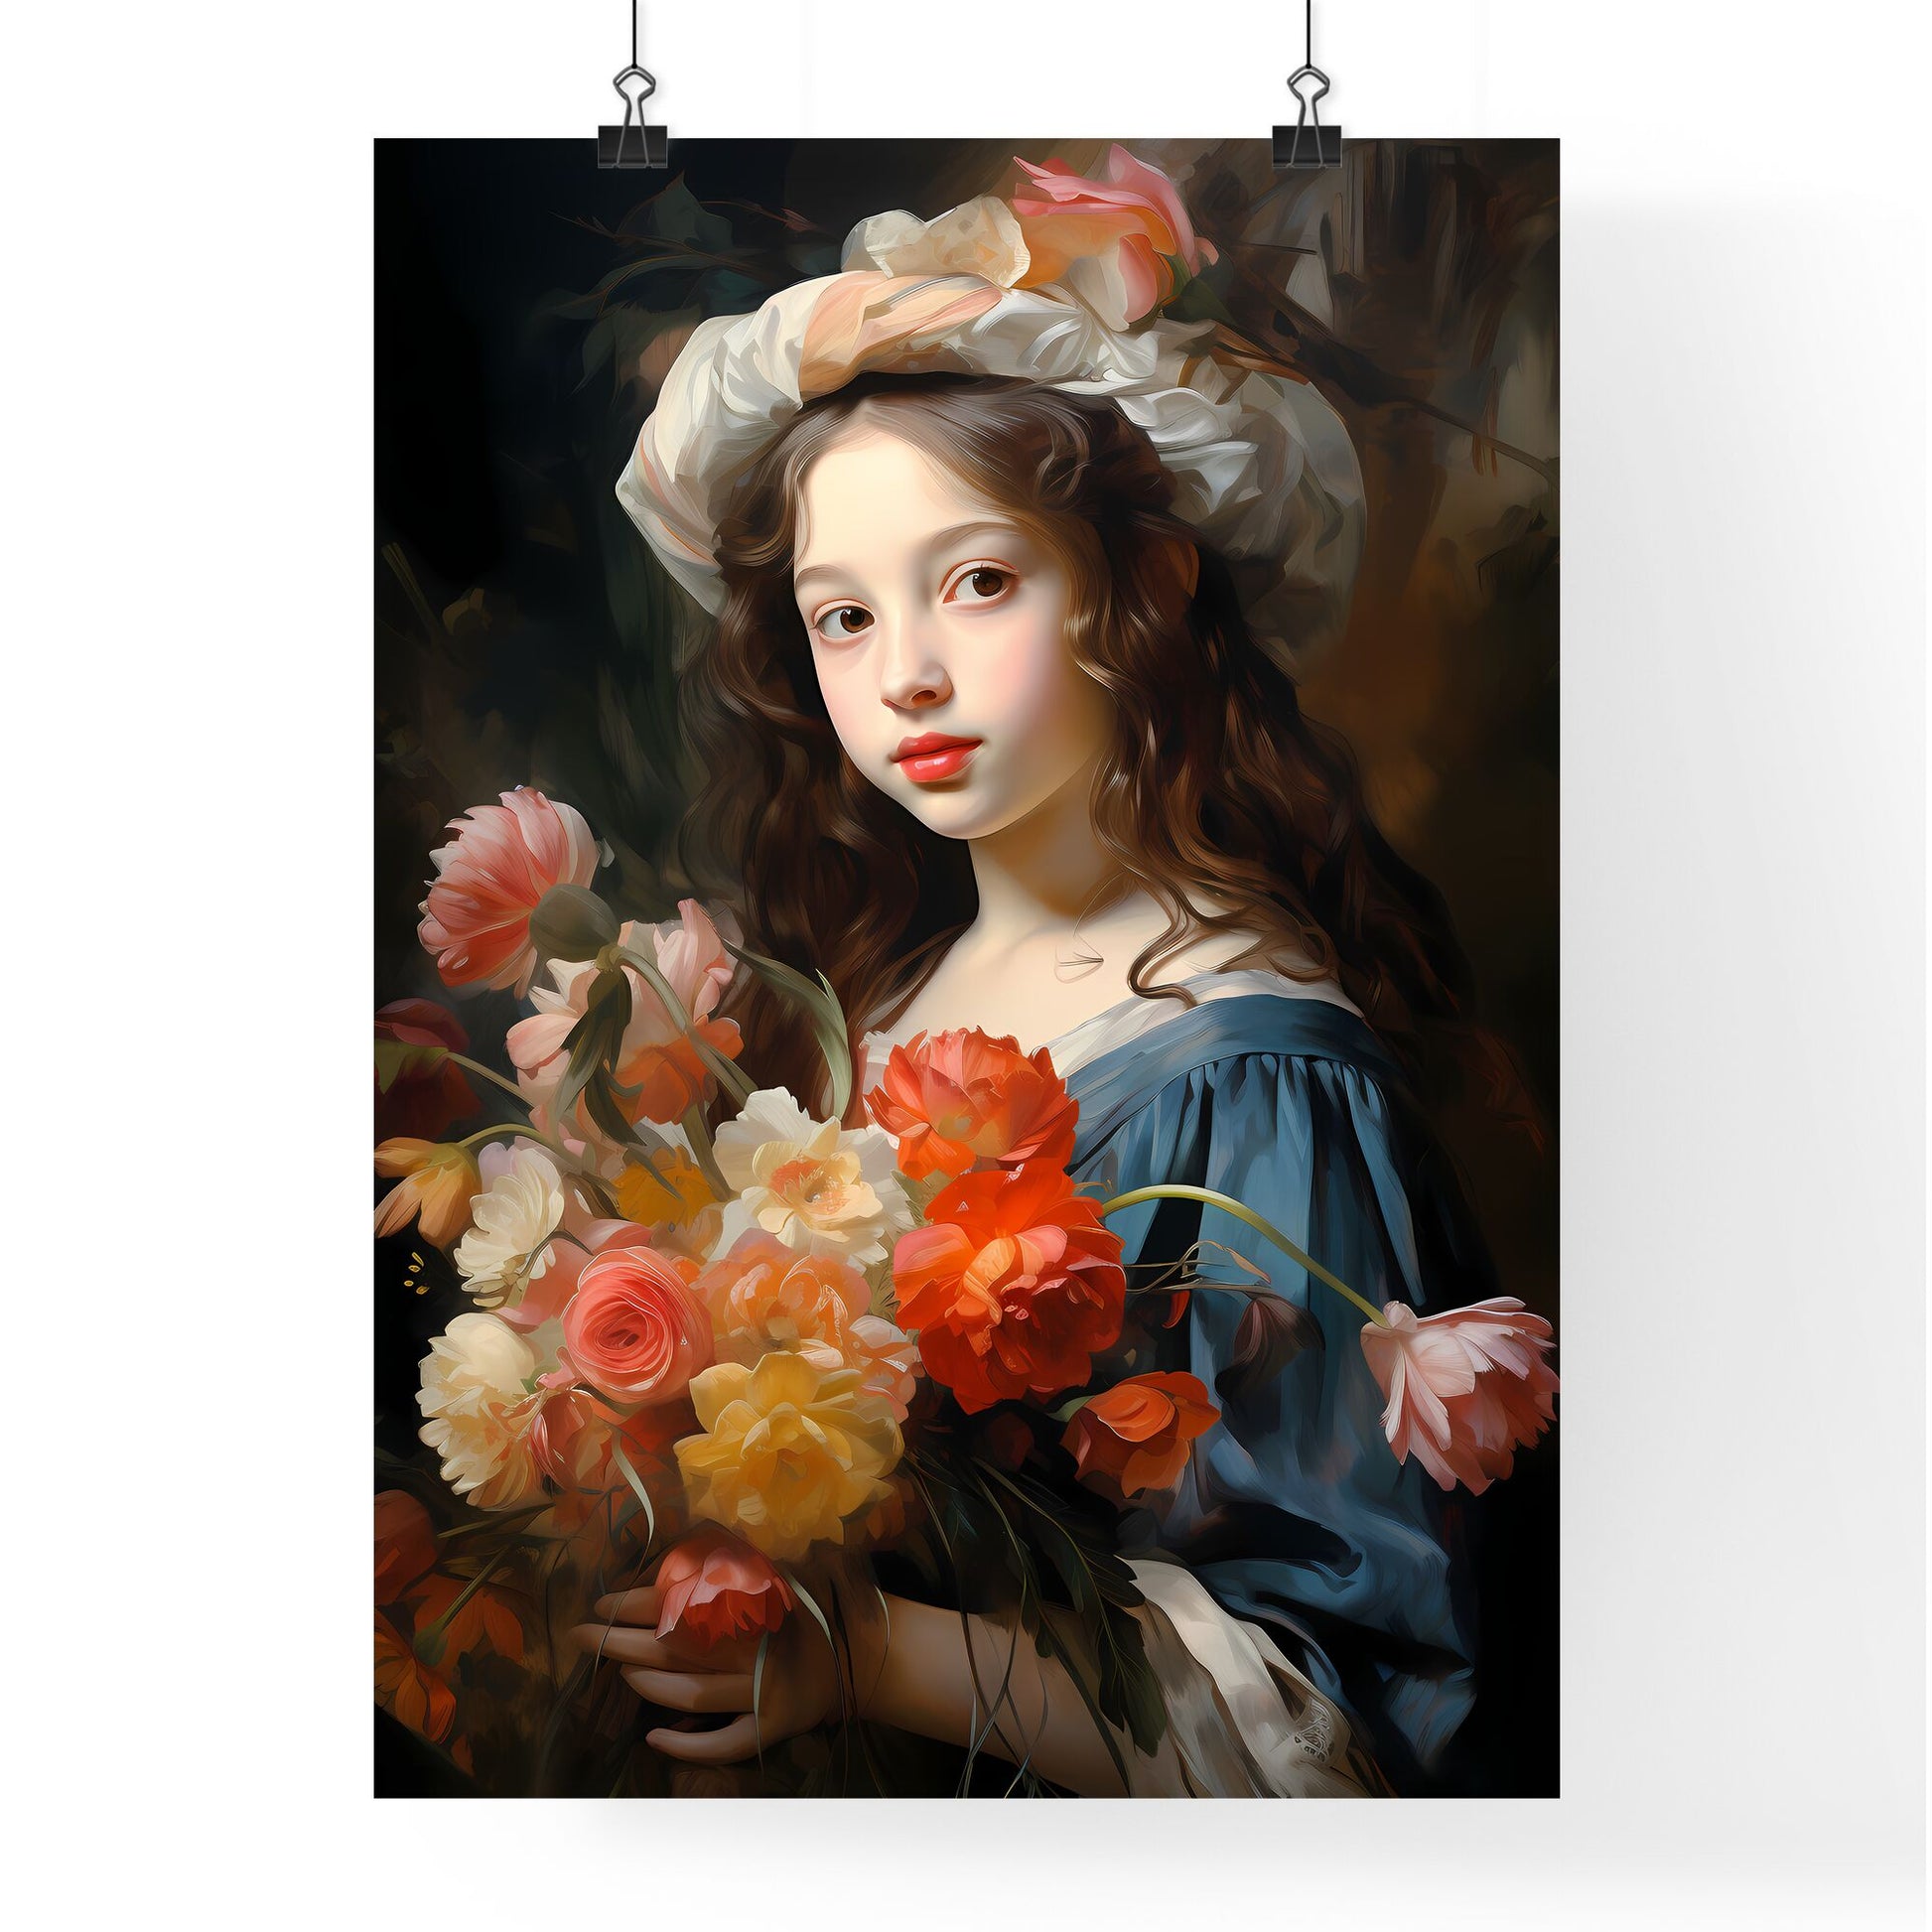 The Young Girl With A Bouquet Of Flowers - A Girl Holding Flowers Default Title